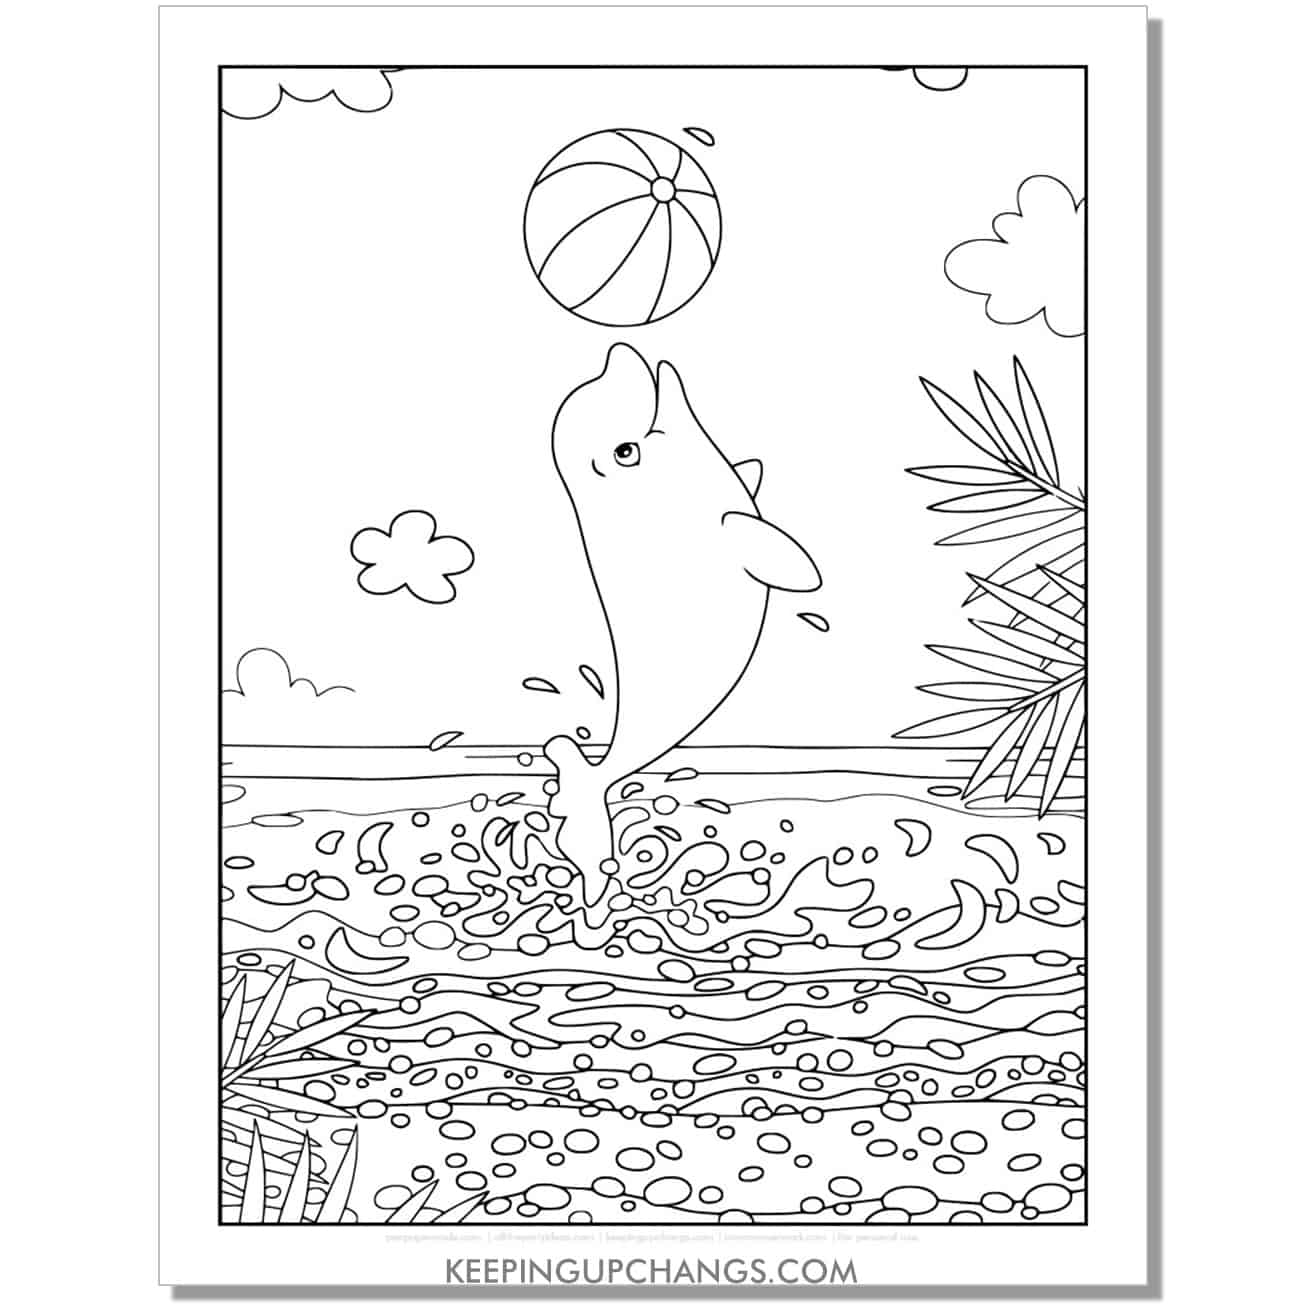 free dolphin bouncing ball on nose detailed coloring page, sheet.